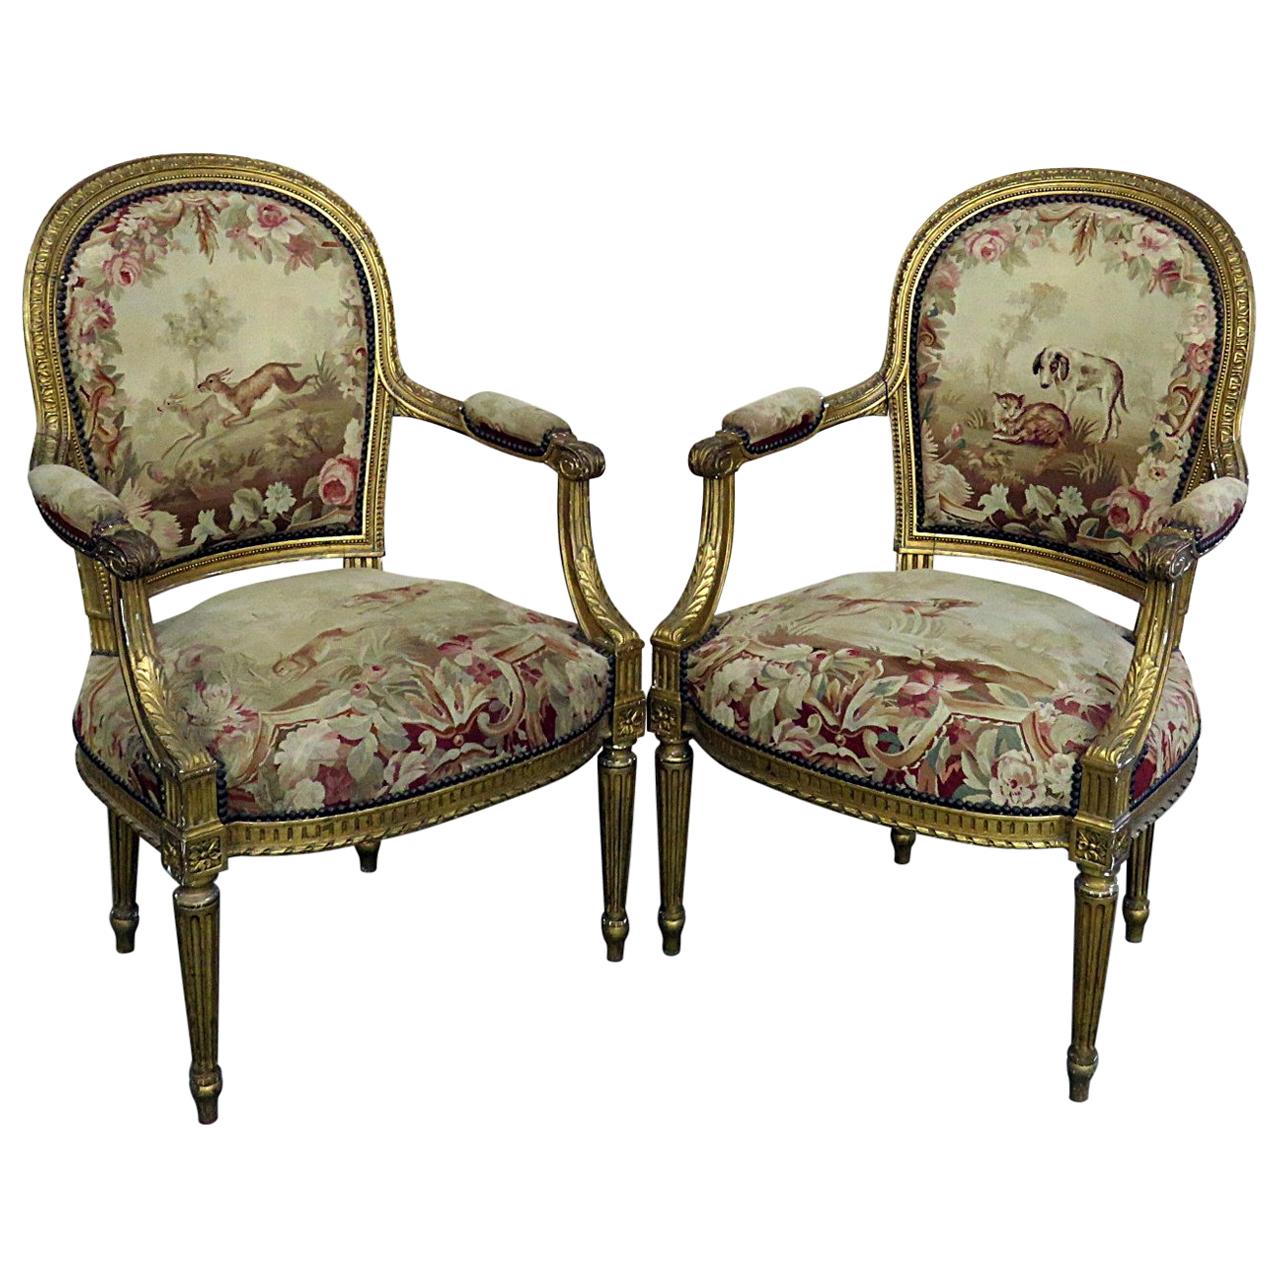 Pair of French Louis XVI Style Needlepoint Fauteuils